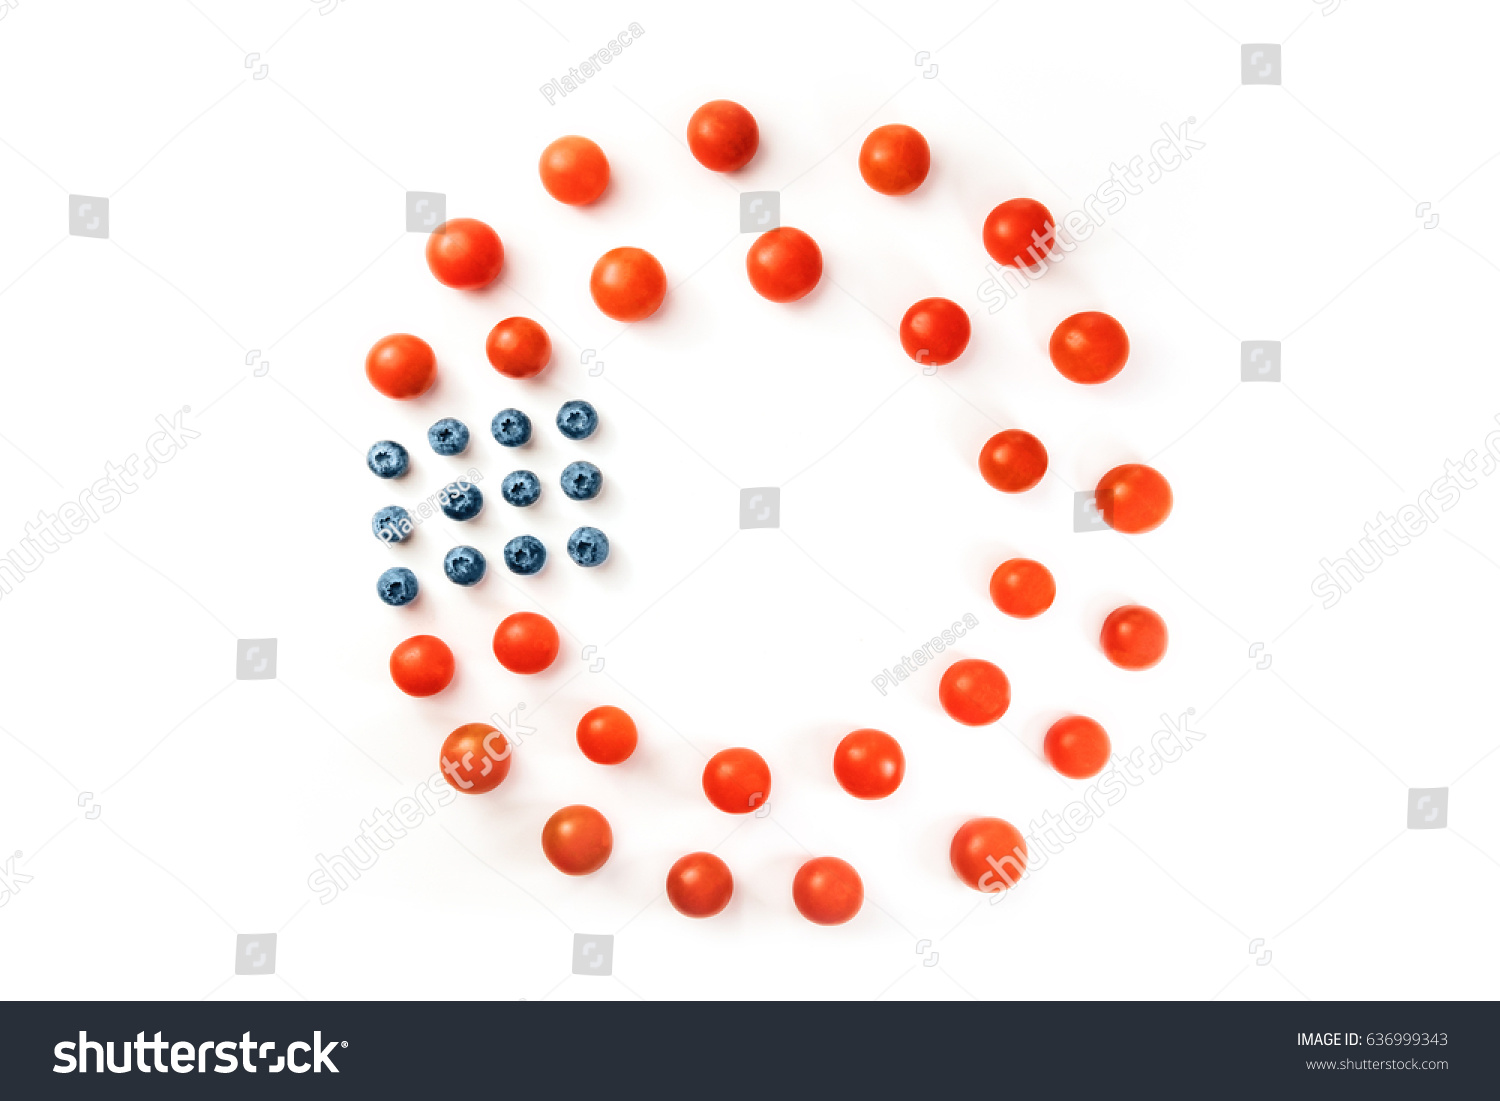 Cherry tomatoes and blueberries on white background, forming a frame for copy space. Culinary still life in colors of American flag. Independence Day or Memorial Day greeting card, 4th of July banner #636999343